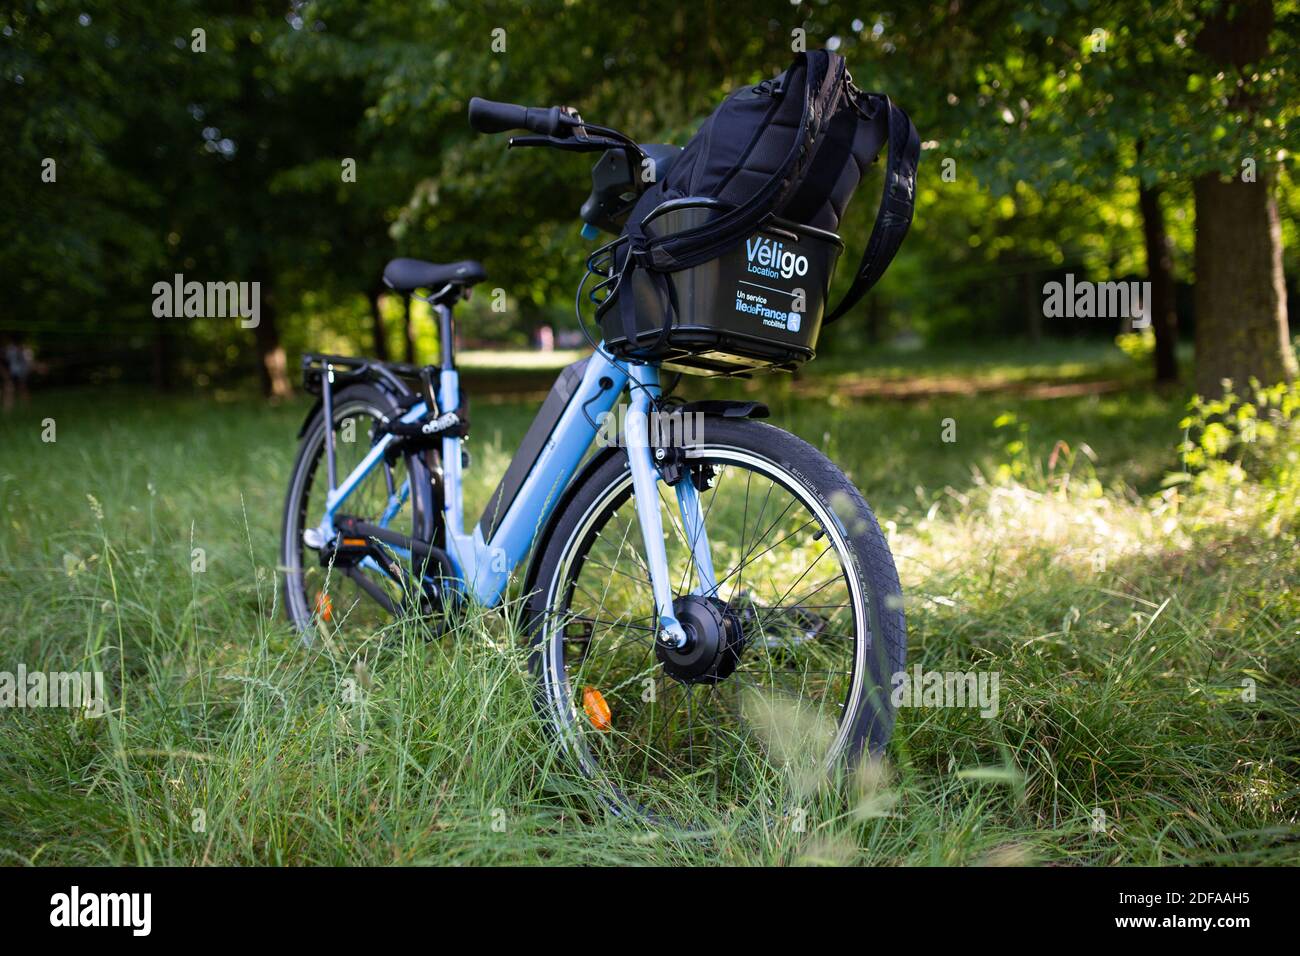 Illustration of Veligo, the electric bike service of the region Ile de  France at the bois de vincennes park in Paris, on May 24, 2020. The park  has been reopen after the